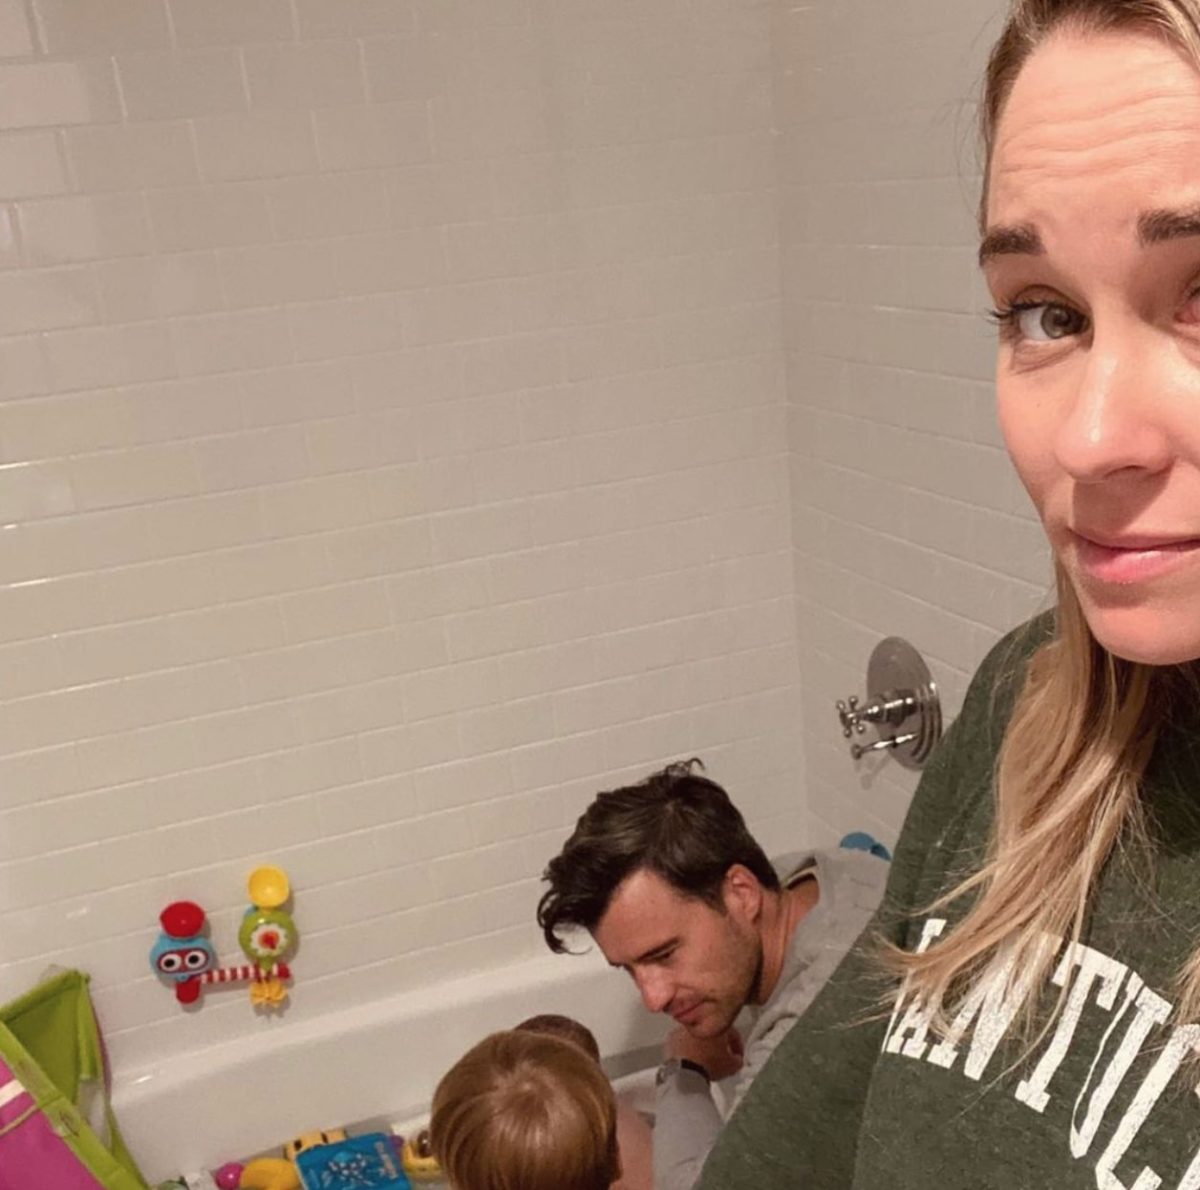 Lauren Conrad Posts Only Photo She Took All Year Of Family